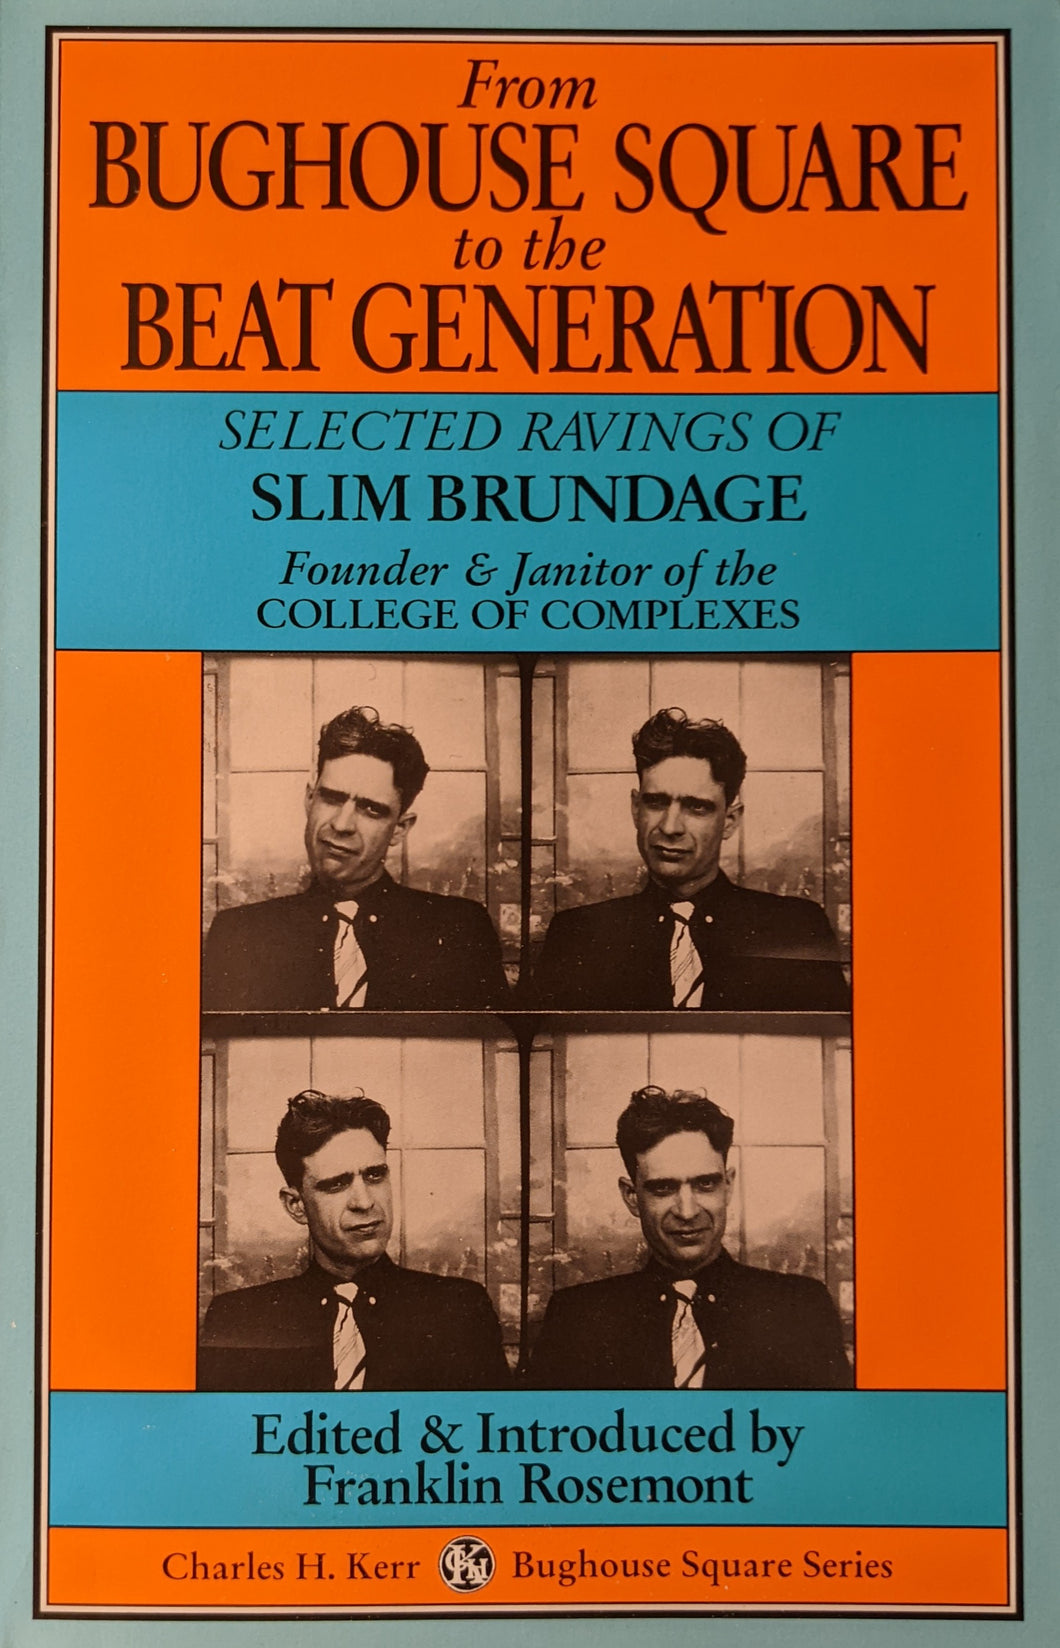 From Bughouse Square to the Beat Generation: Selected Ravings of Slim Brundage - Founder & Janitor of the College of Complexes